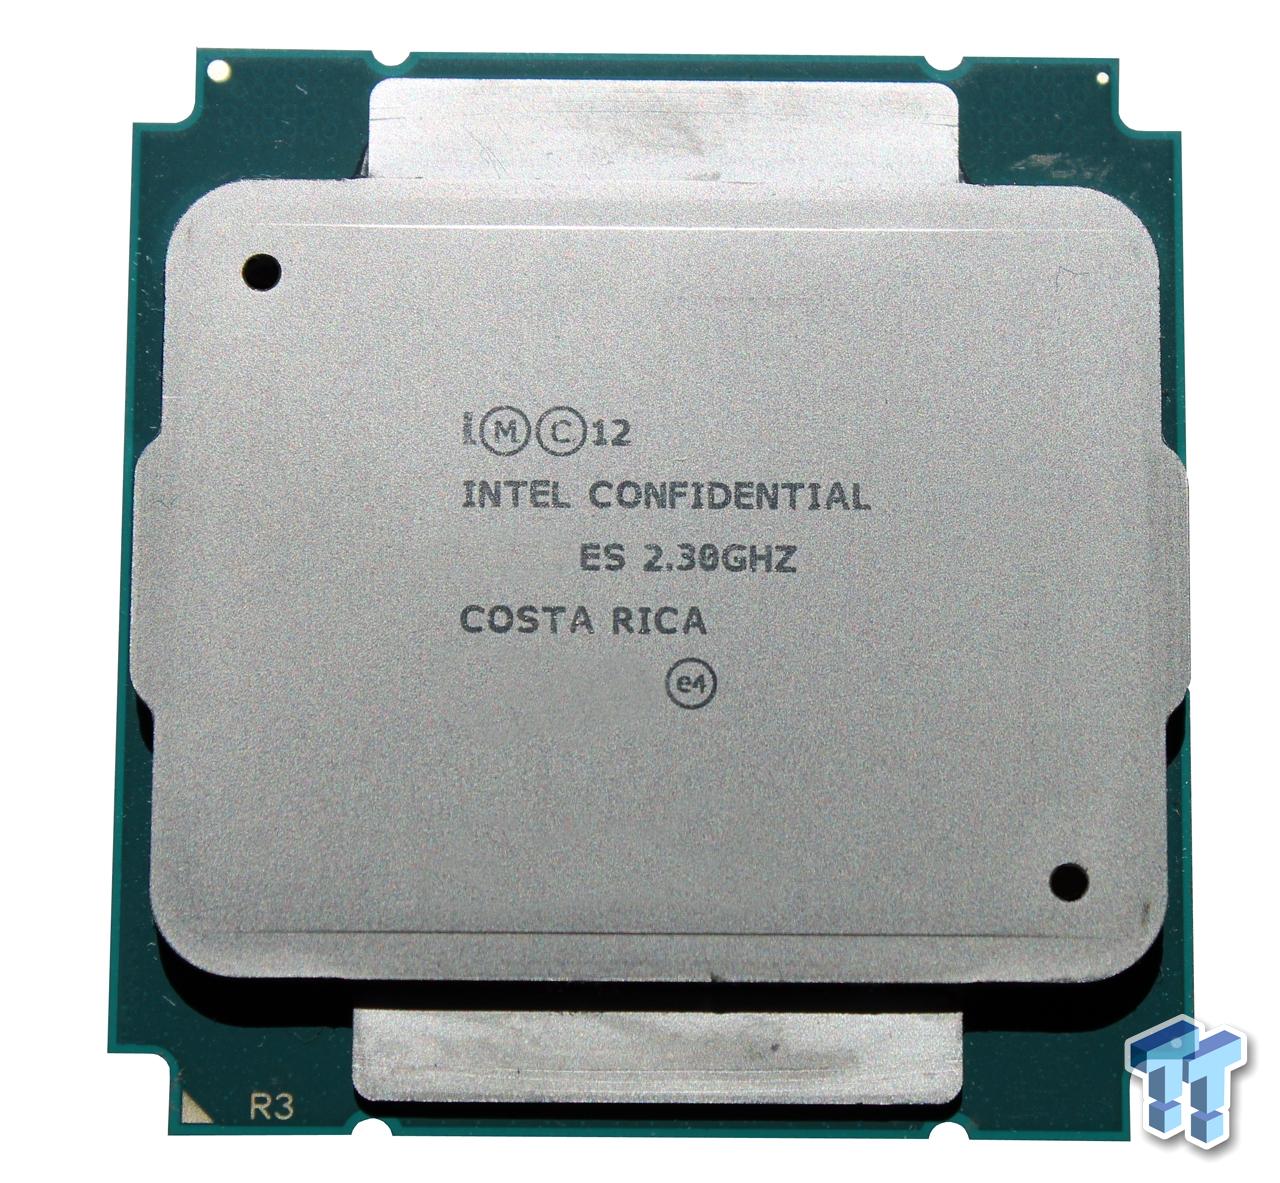 Intel Haswell-EP Xeon E5-2600 v3 Server Family Processor Overview